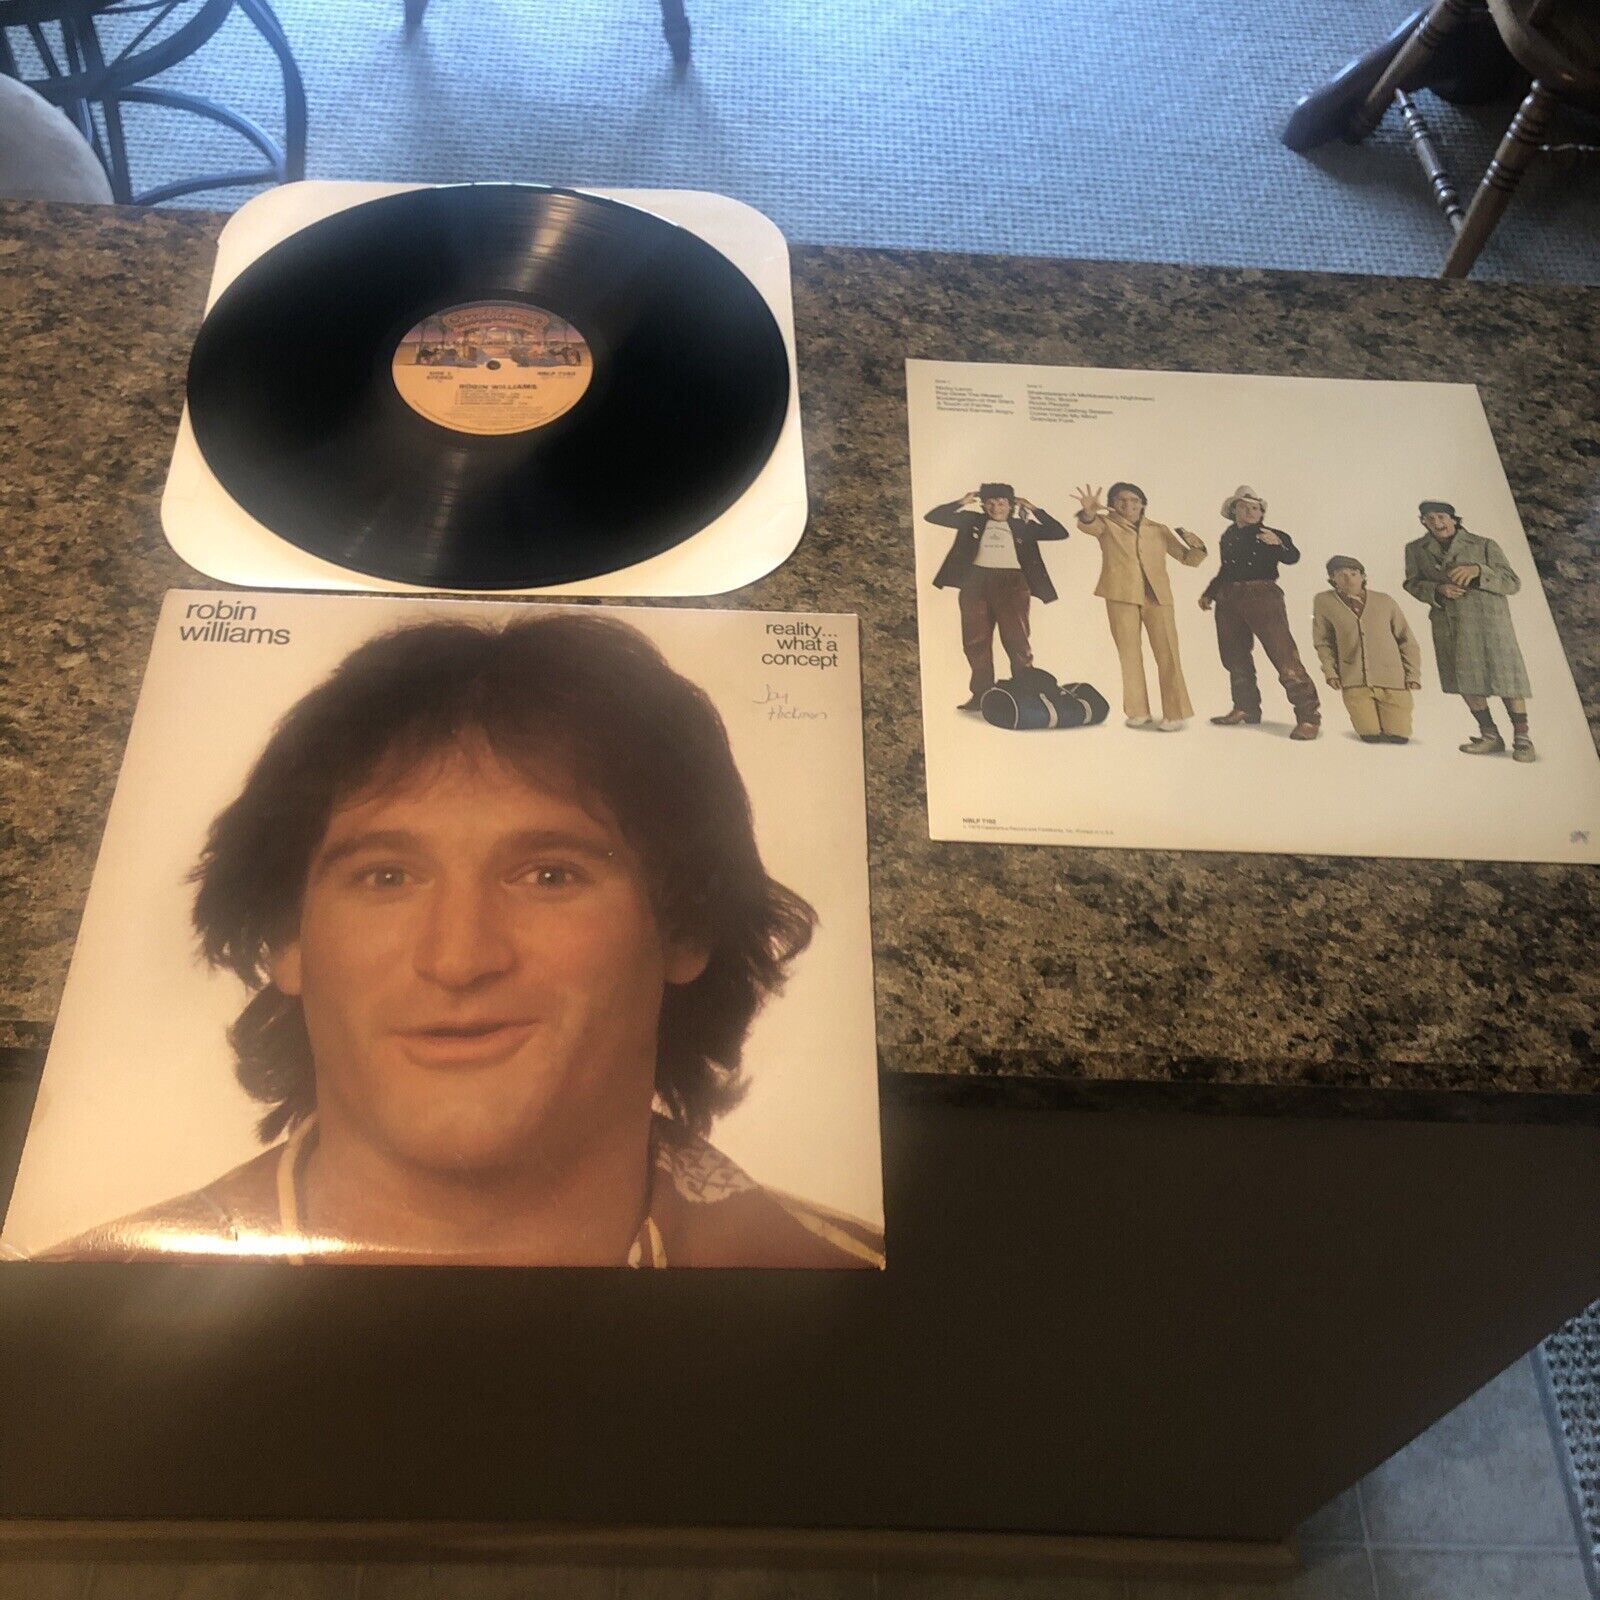 Robin Williams Reality What A Concept LP NBLP-7162